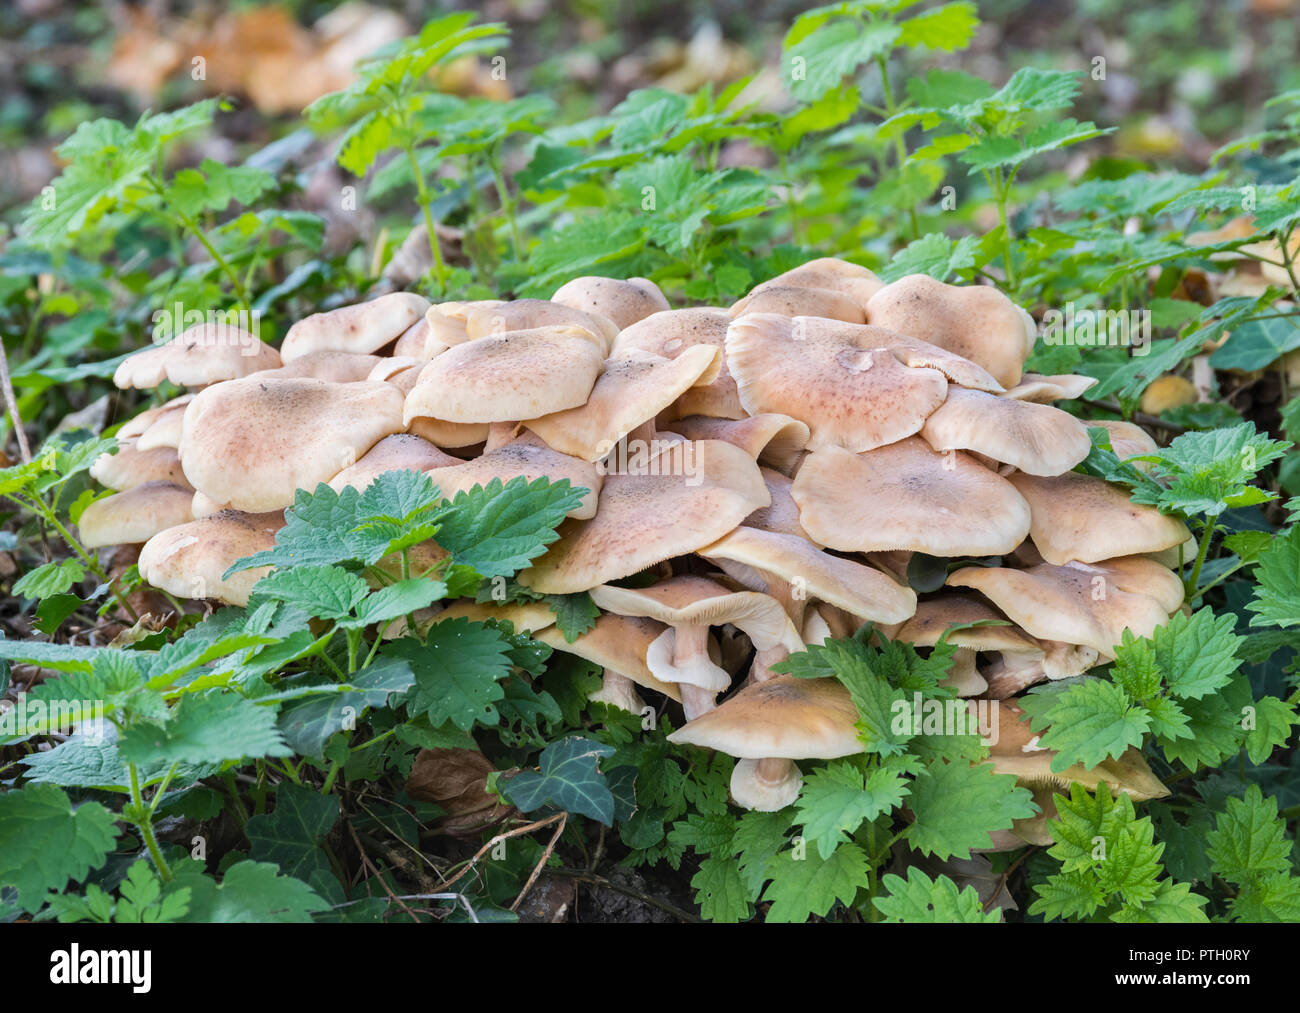 Clump of Wood Blewit mushrooms fungi (Clitocybe nuda or Lepista nuda) growing in early Autumn in woodland in West Sussex, UK. Stock Photo